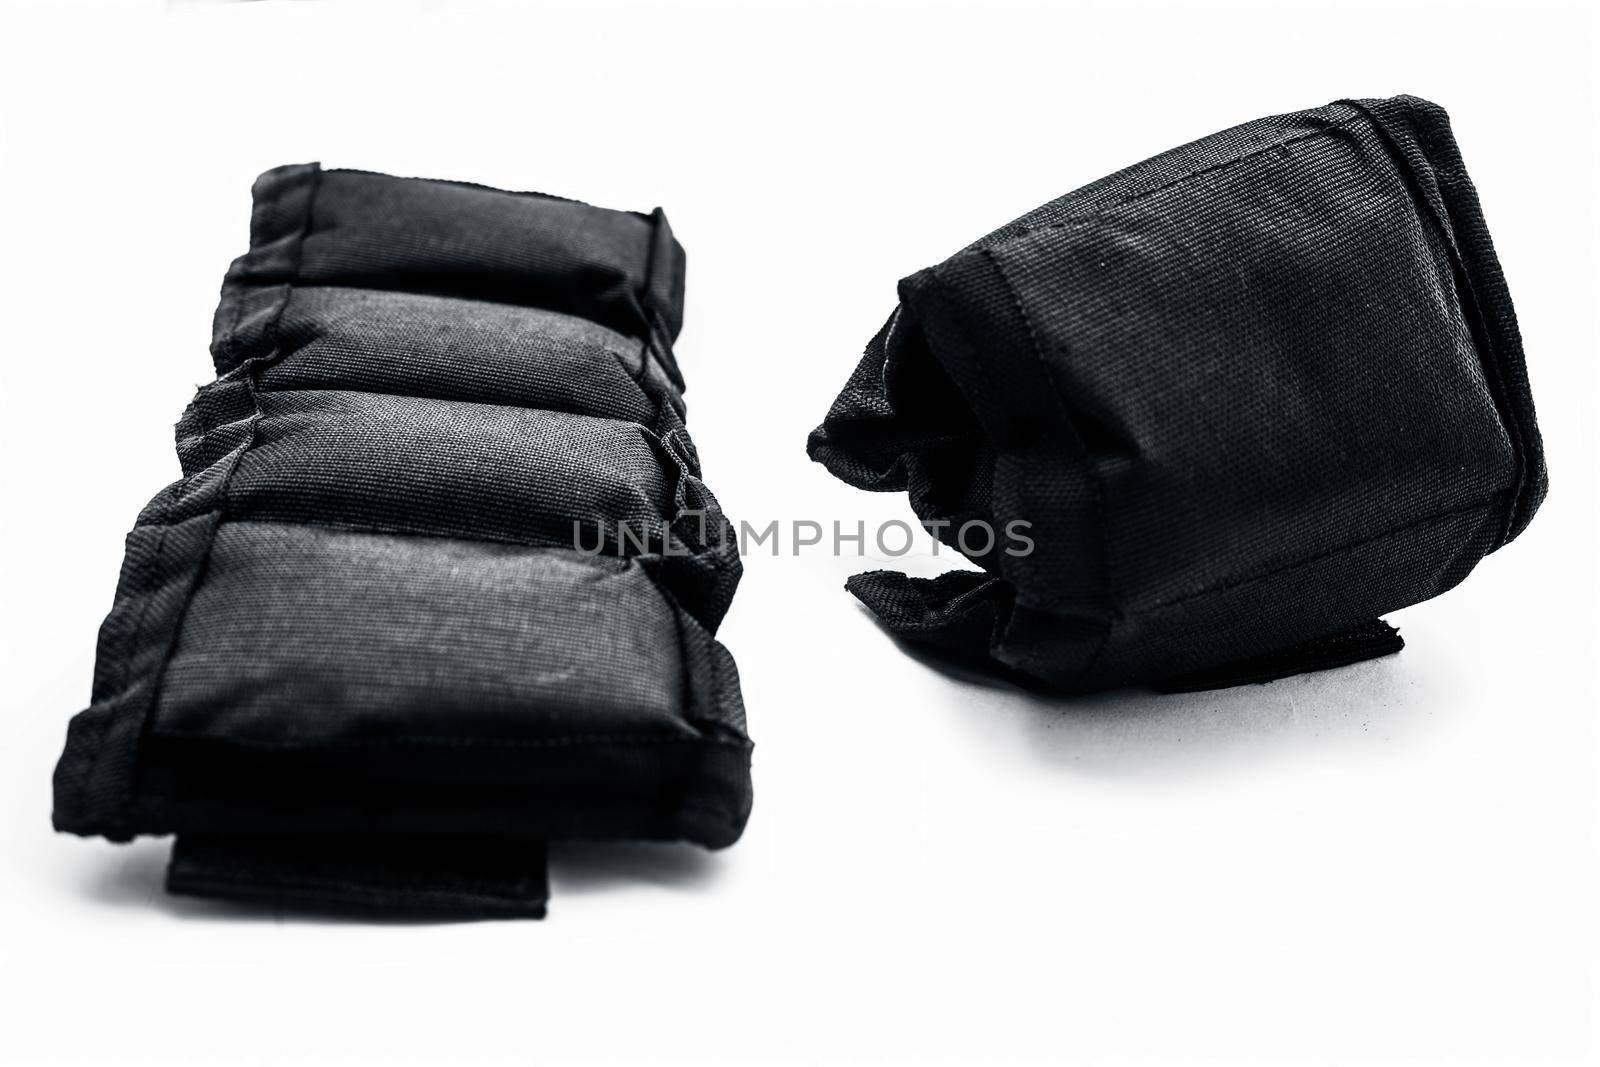 Black colored ankle weights isolated on white.